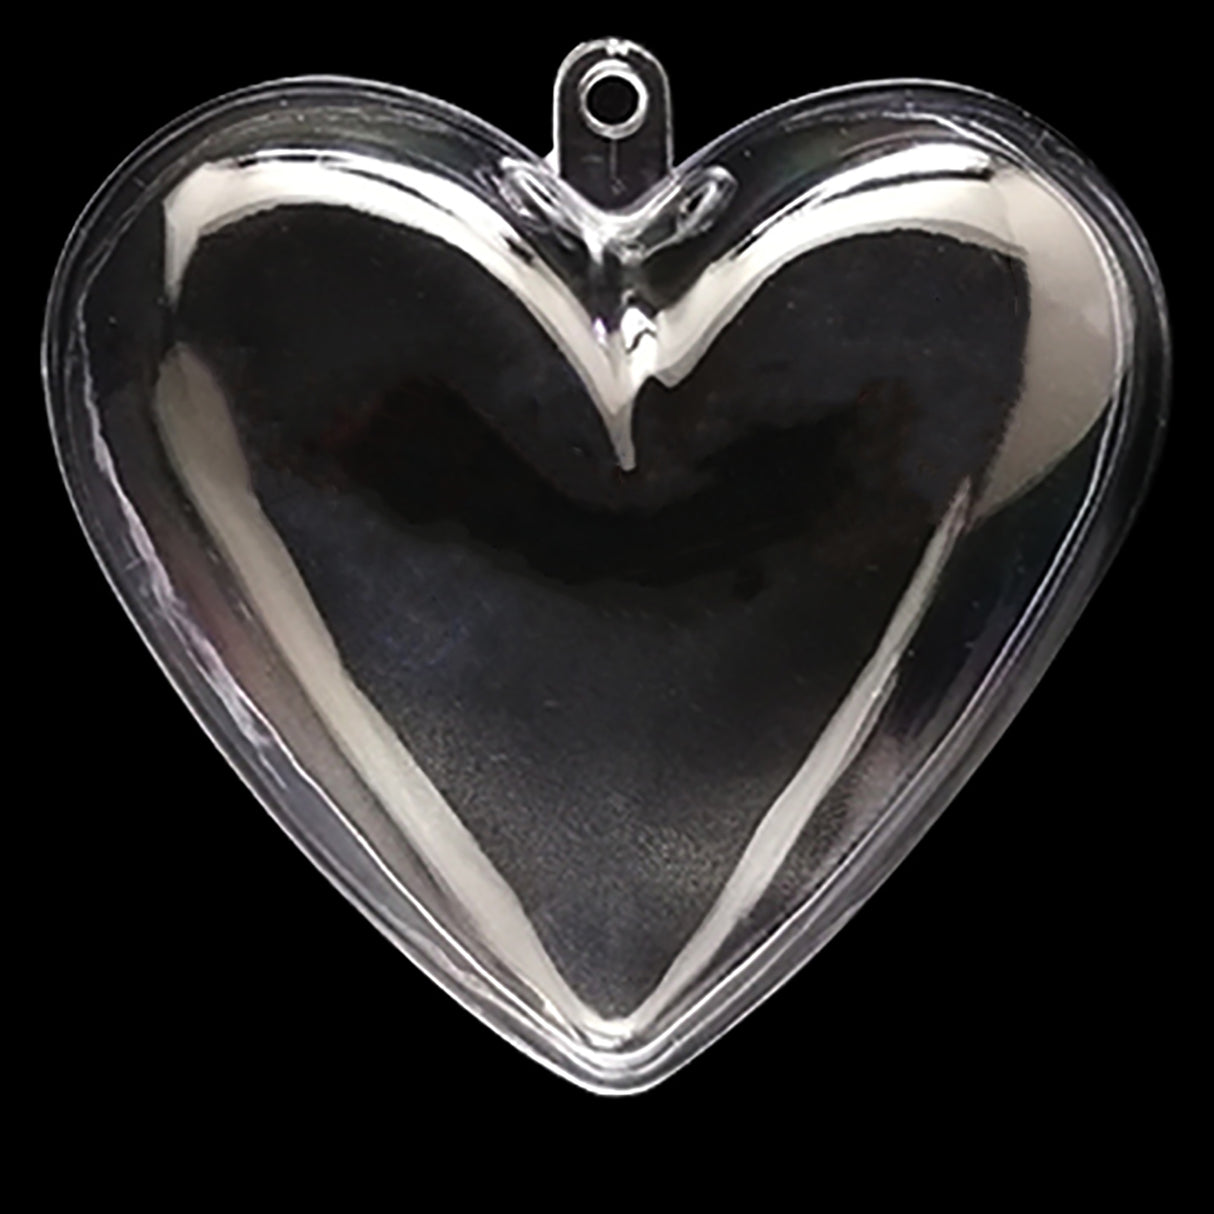 Set of 3 Clear Plastic Hearts Ornaments 2.45 Inches (62 mm)